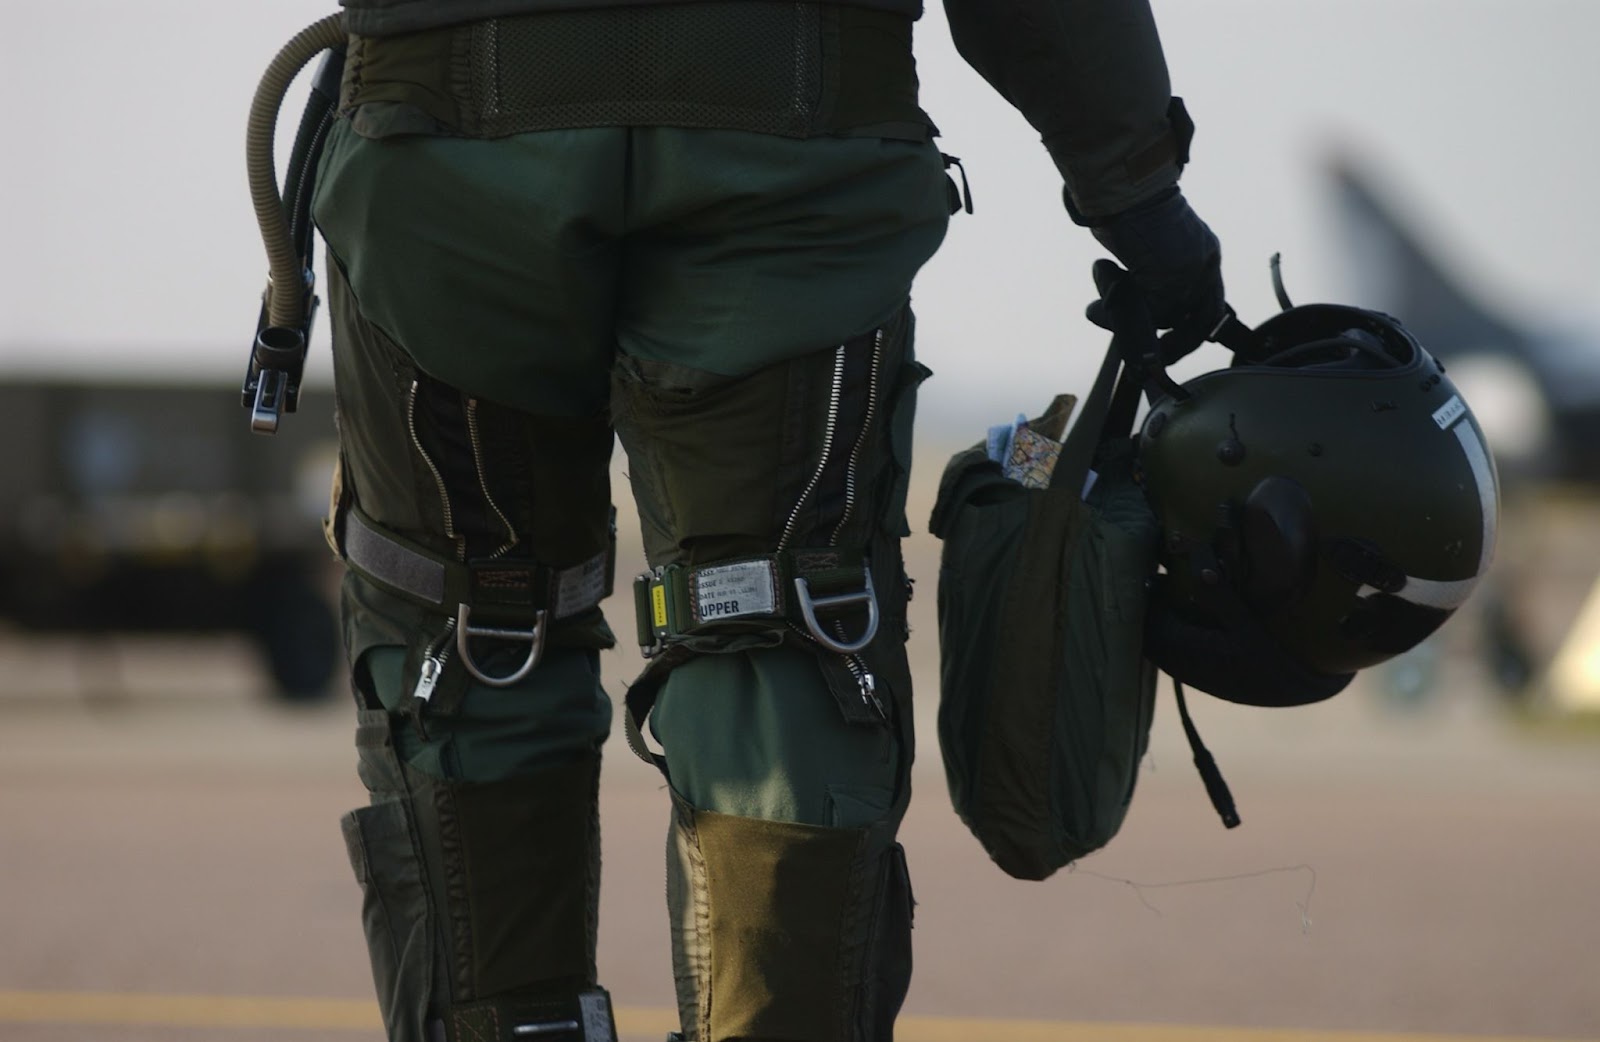 A fighter pilot walking to their jet.